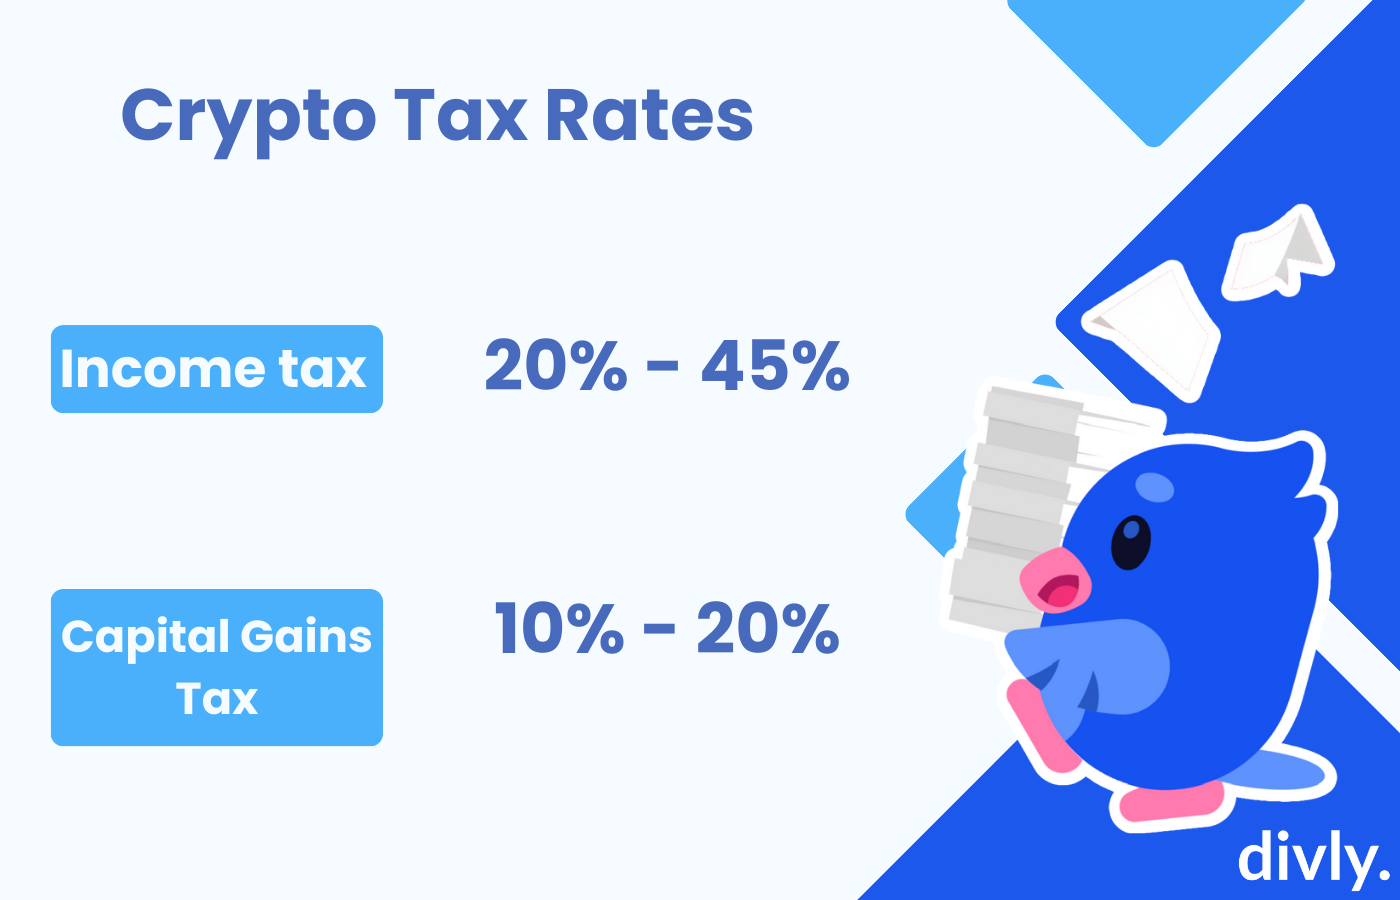 Income tax rate is between 20% to 45%. Capital gains tax rate is 10% or 20%